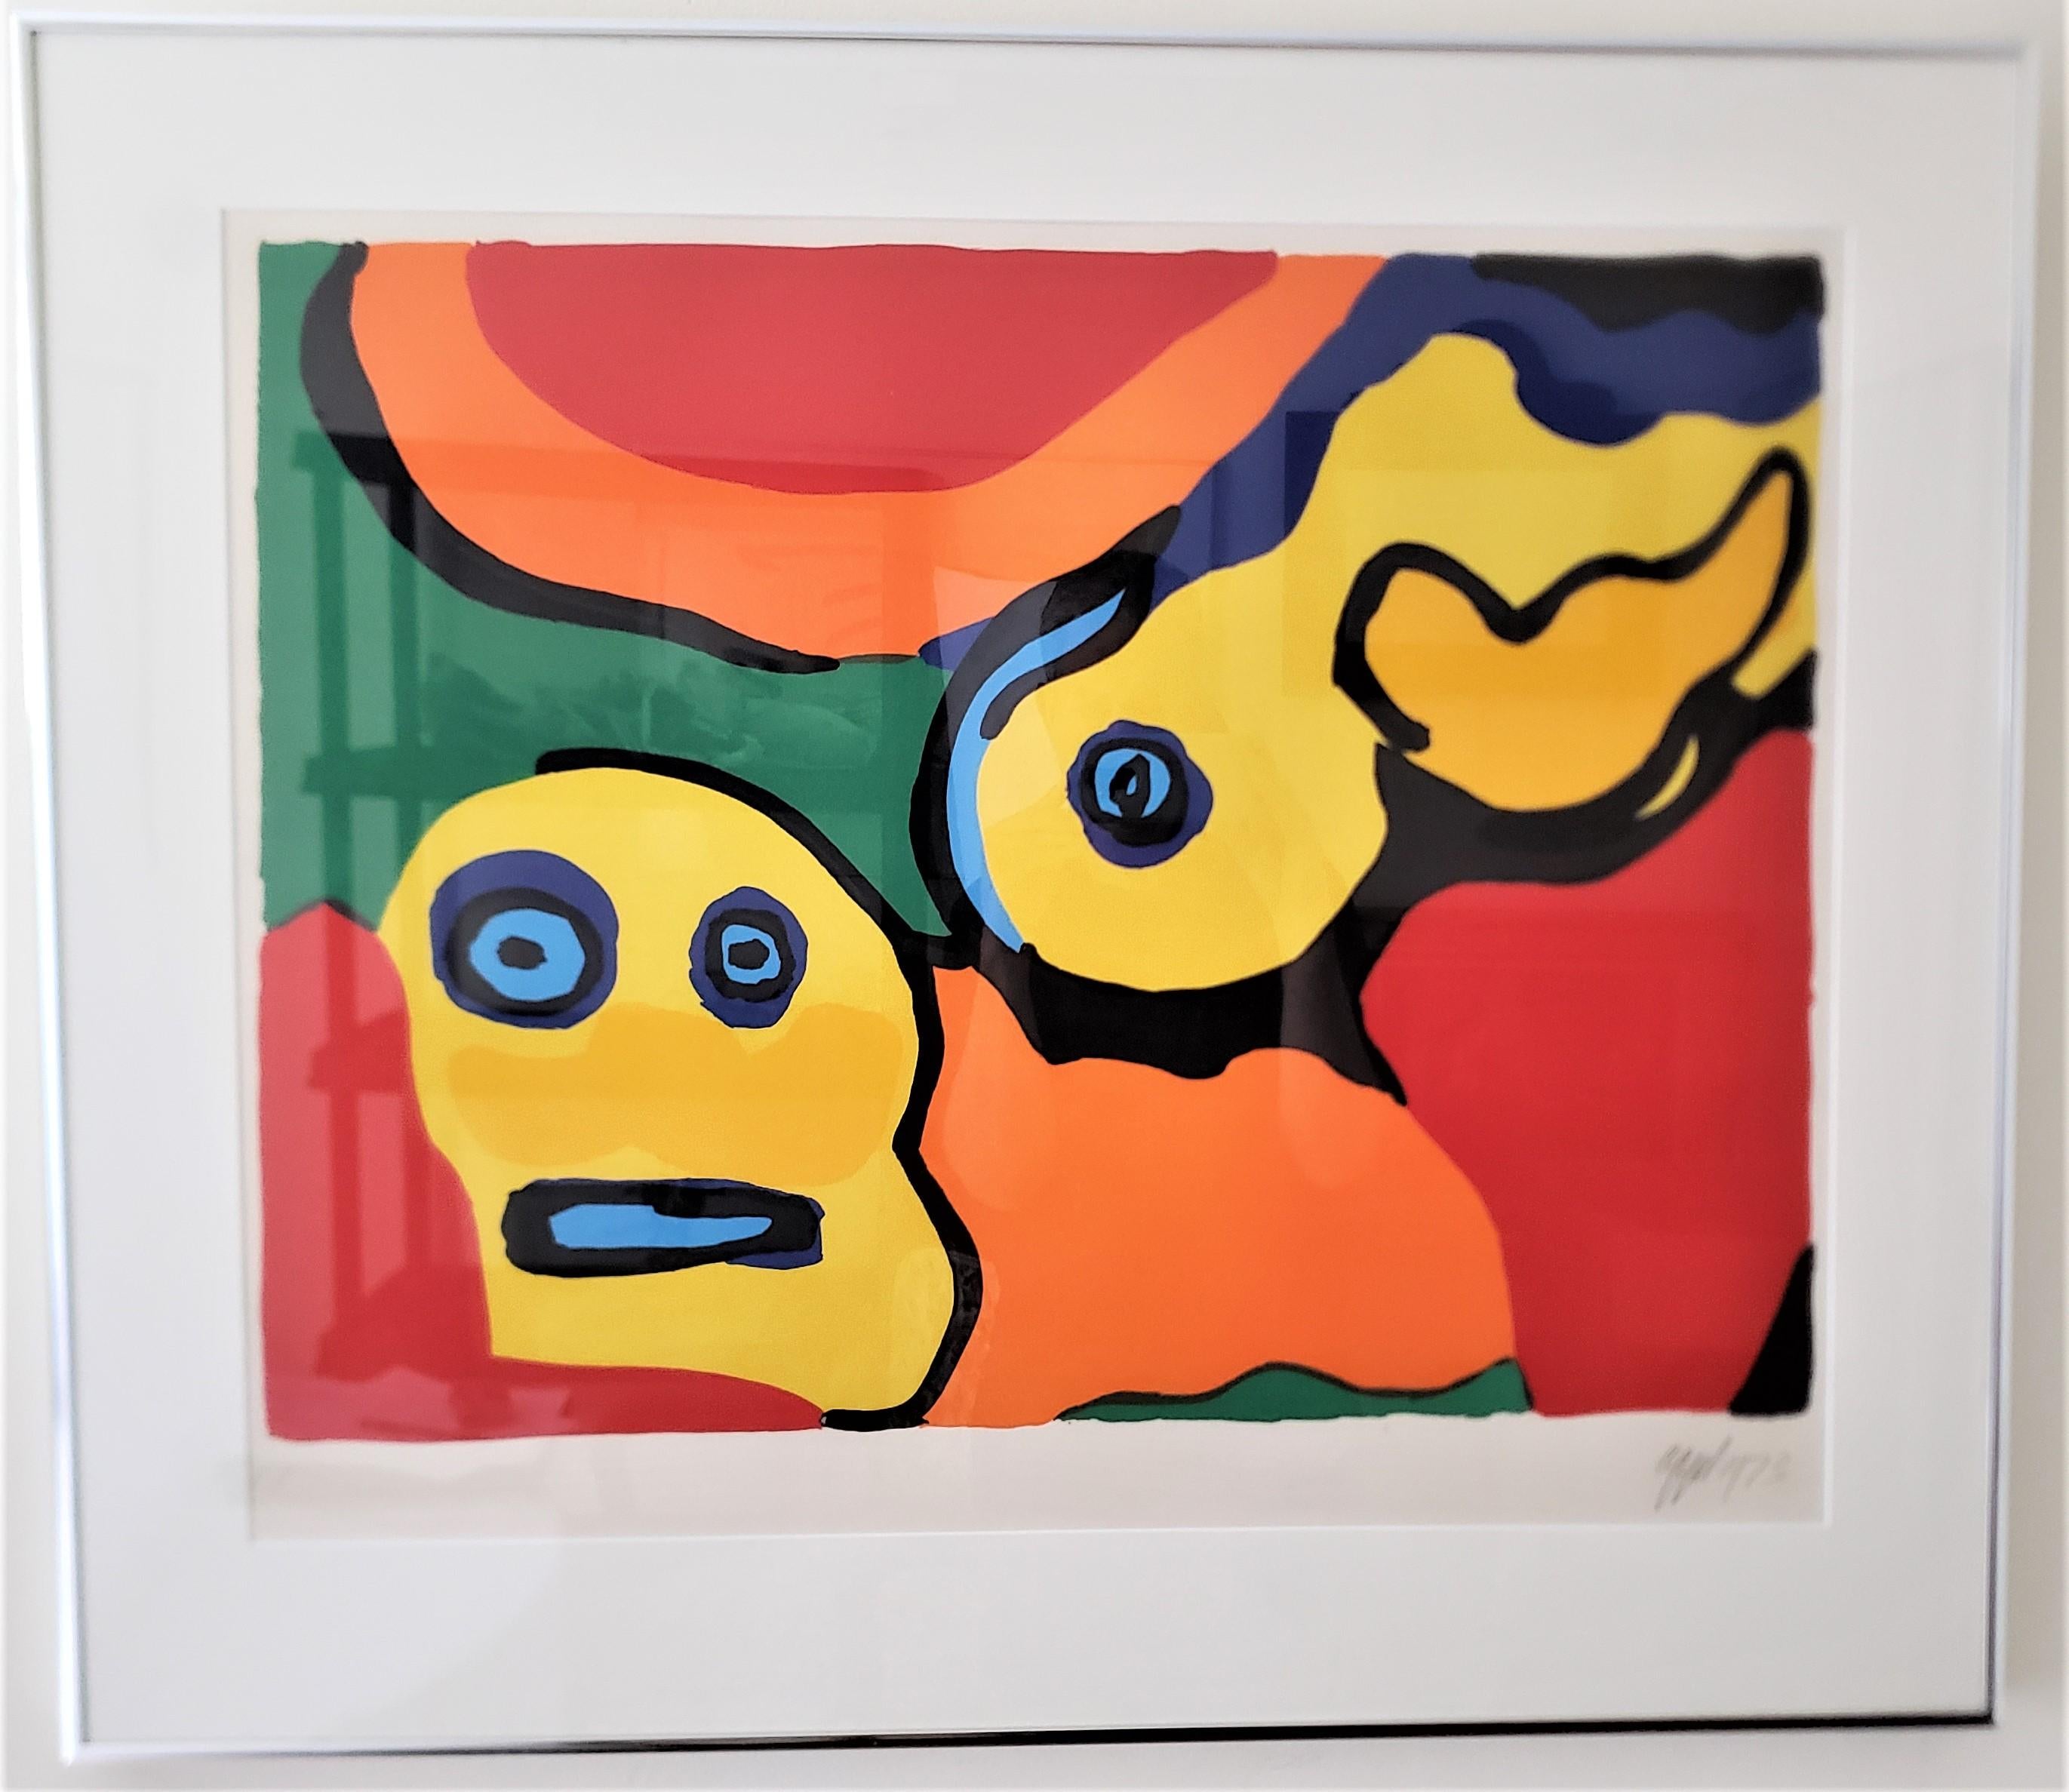 Karel (Karl) Appel Signed Artist's Proof Gallery Framed Lithograph 'Untitled'  In Good Condition For Sale In Hamilton, Ontario